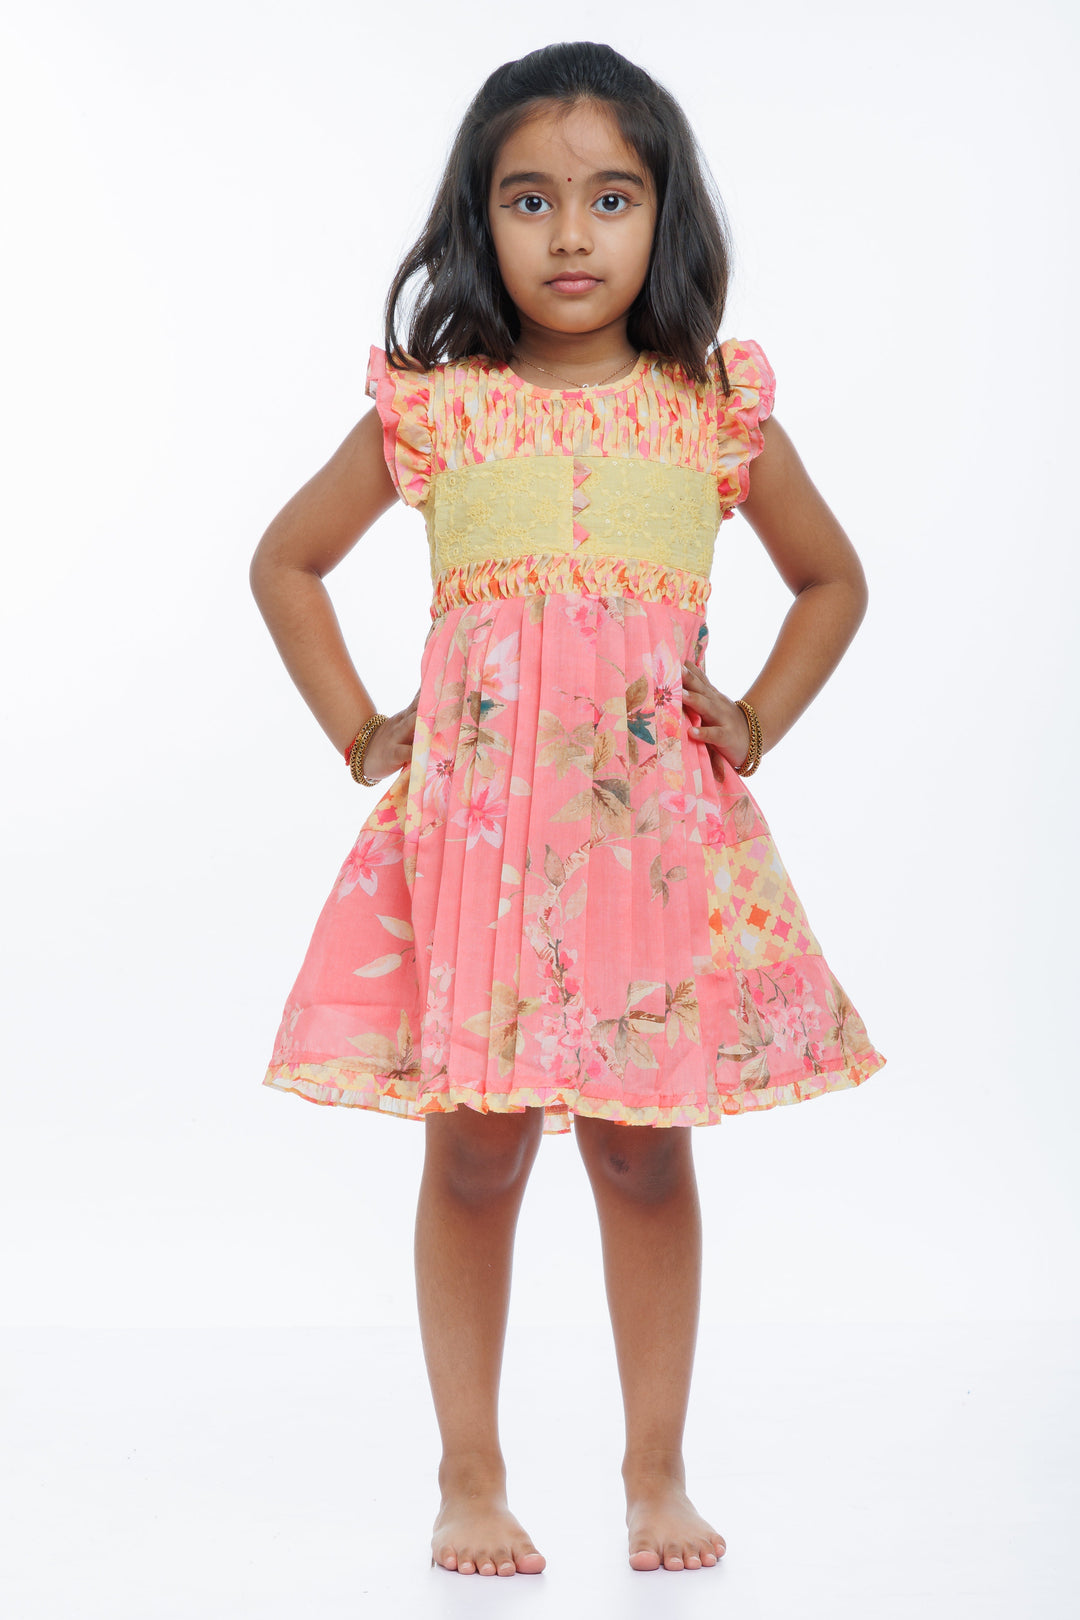 The Nesavu Girls Cotton Frock Charming Pink Cotton Floral Frock with Lace Accents for Girls Nesavu 22 (4Y) / Pink / Cotton GFC1269B-22 Girls Pink Floral Cotton Frock | Lace Detailed Summer Dress for Kids | The Nesavu